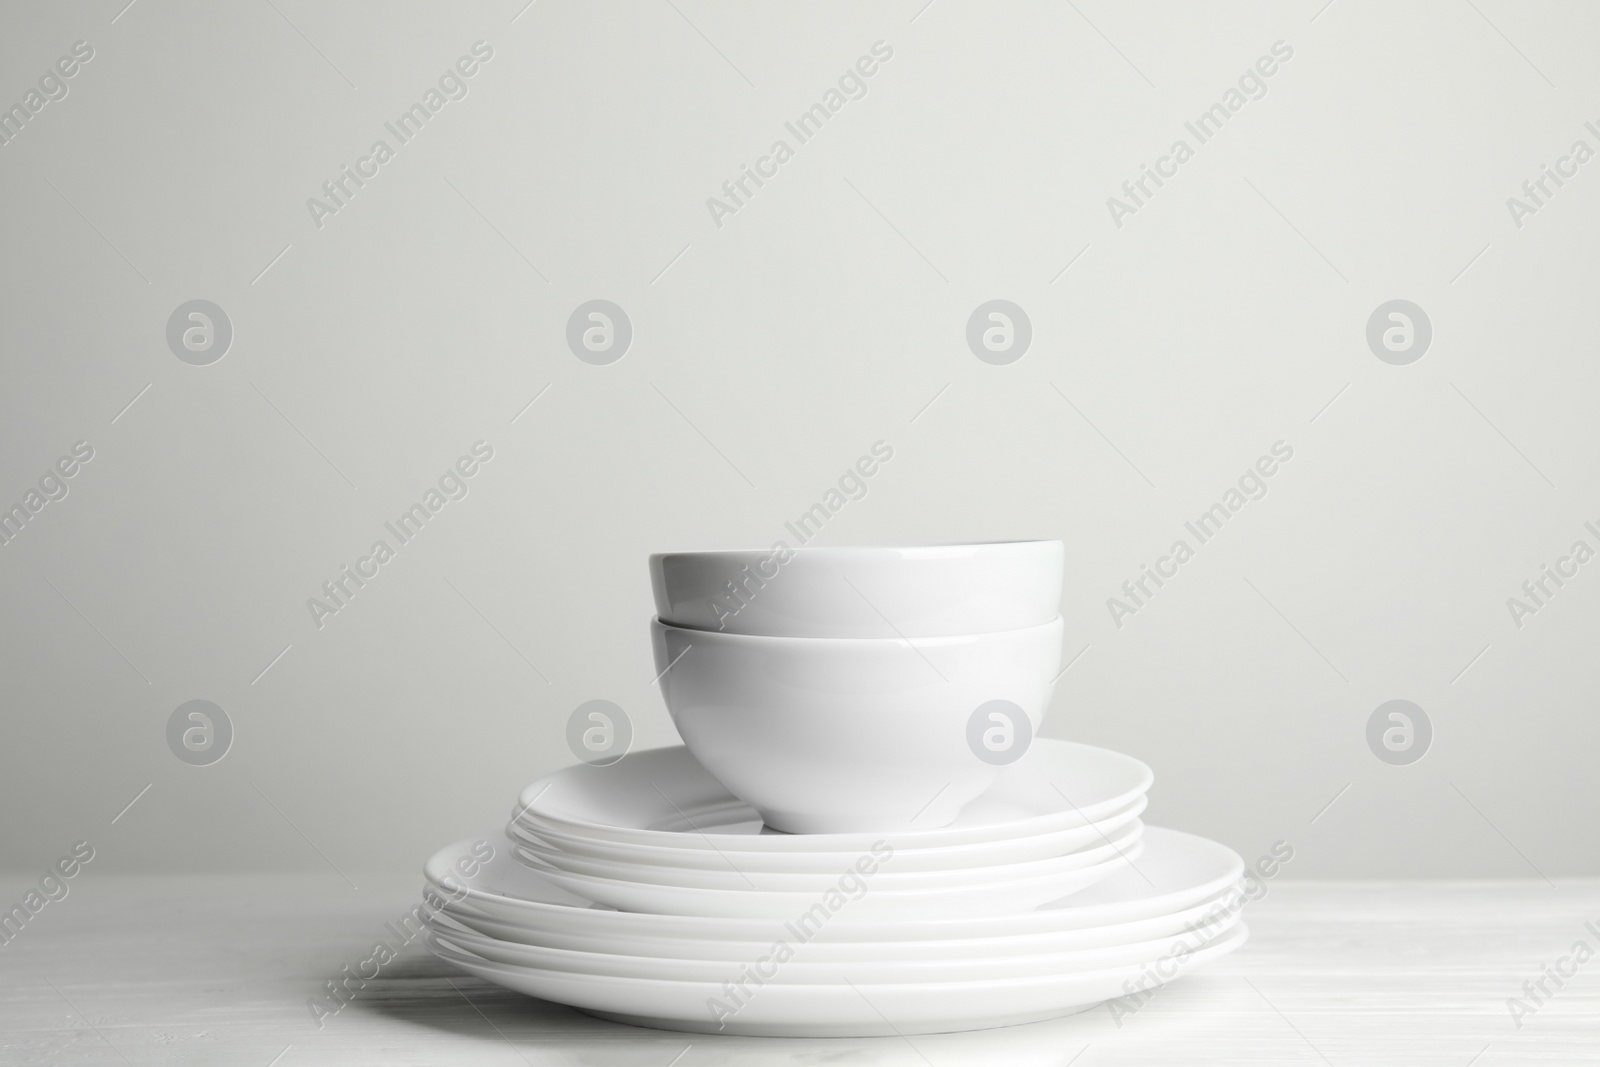 Photo of Stack of clean plates and bowls on wooden table against white background. Space for text